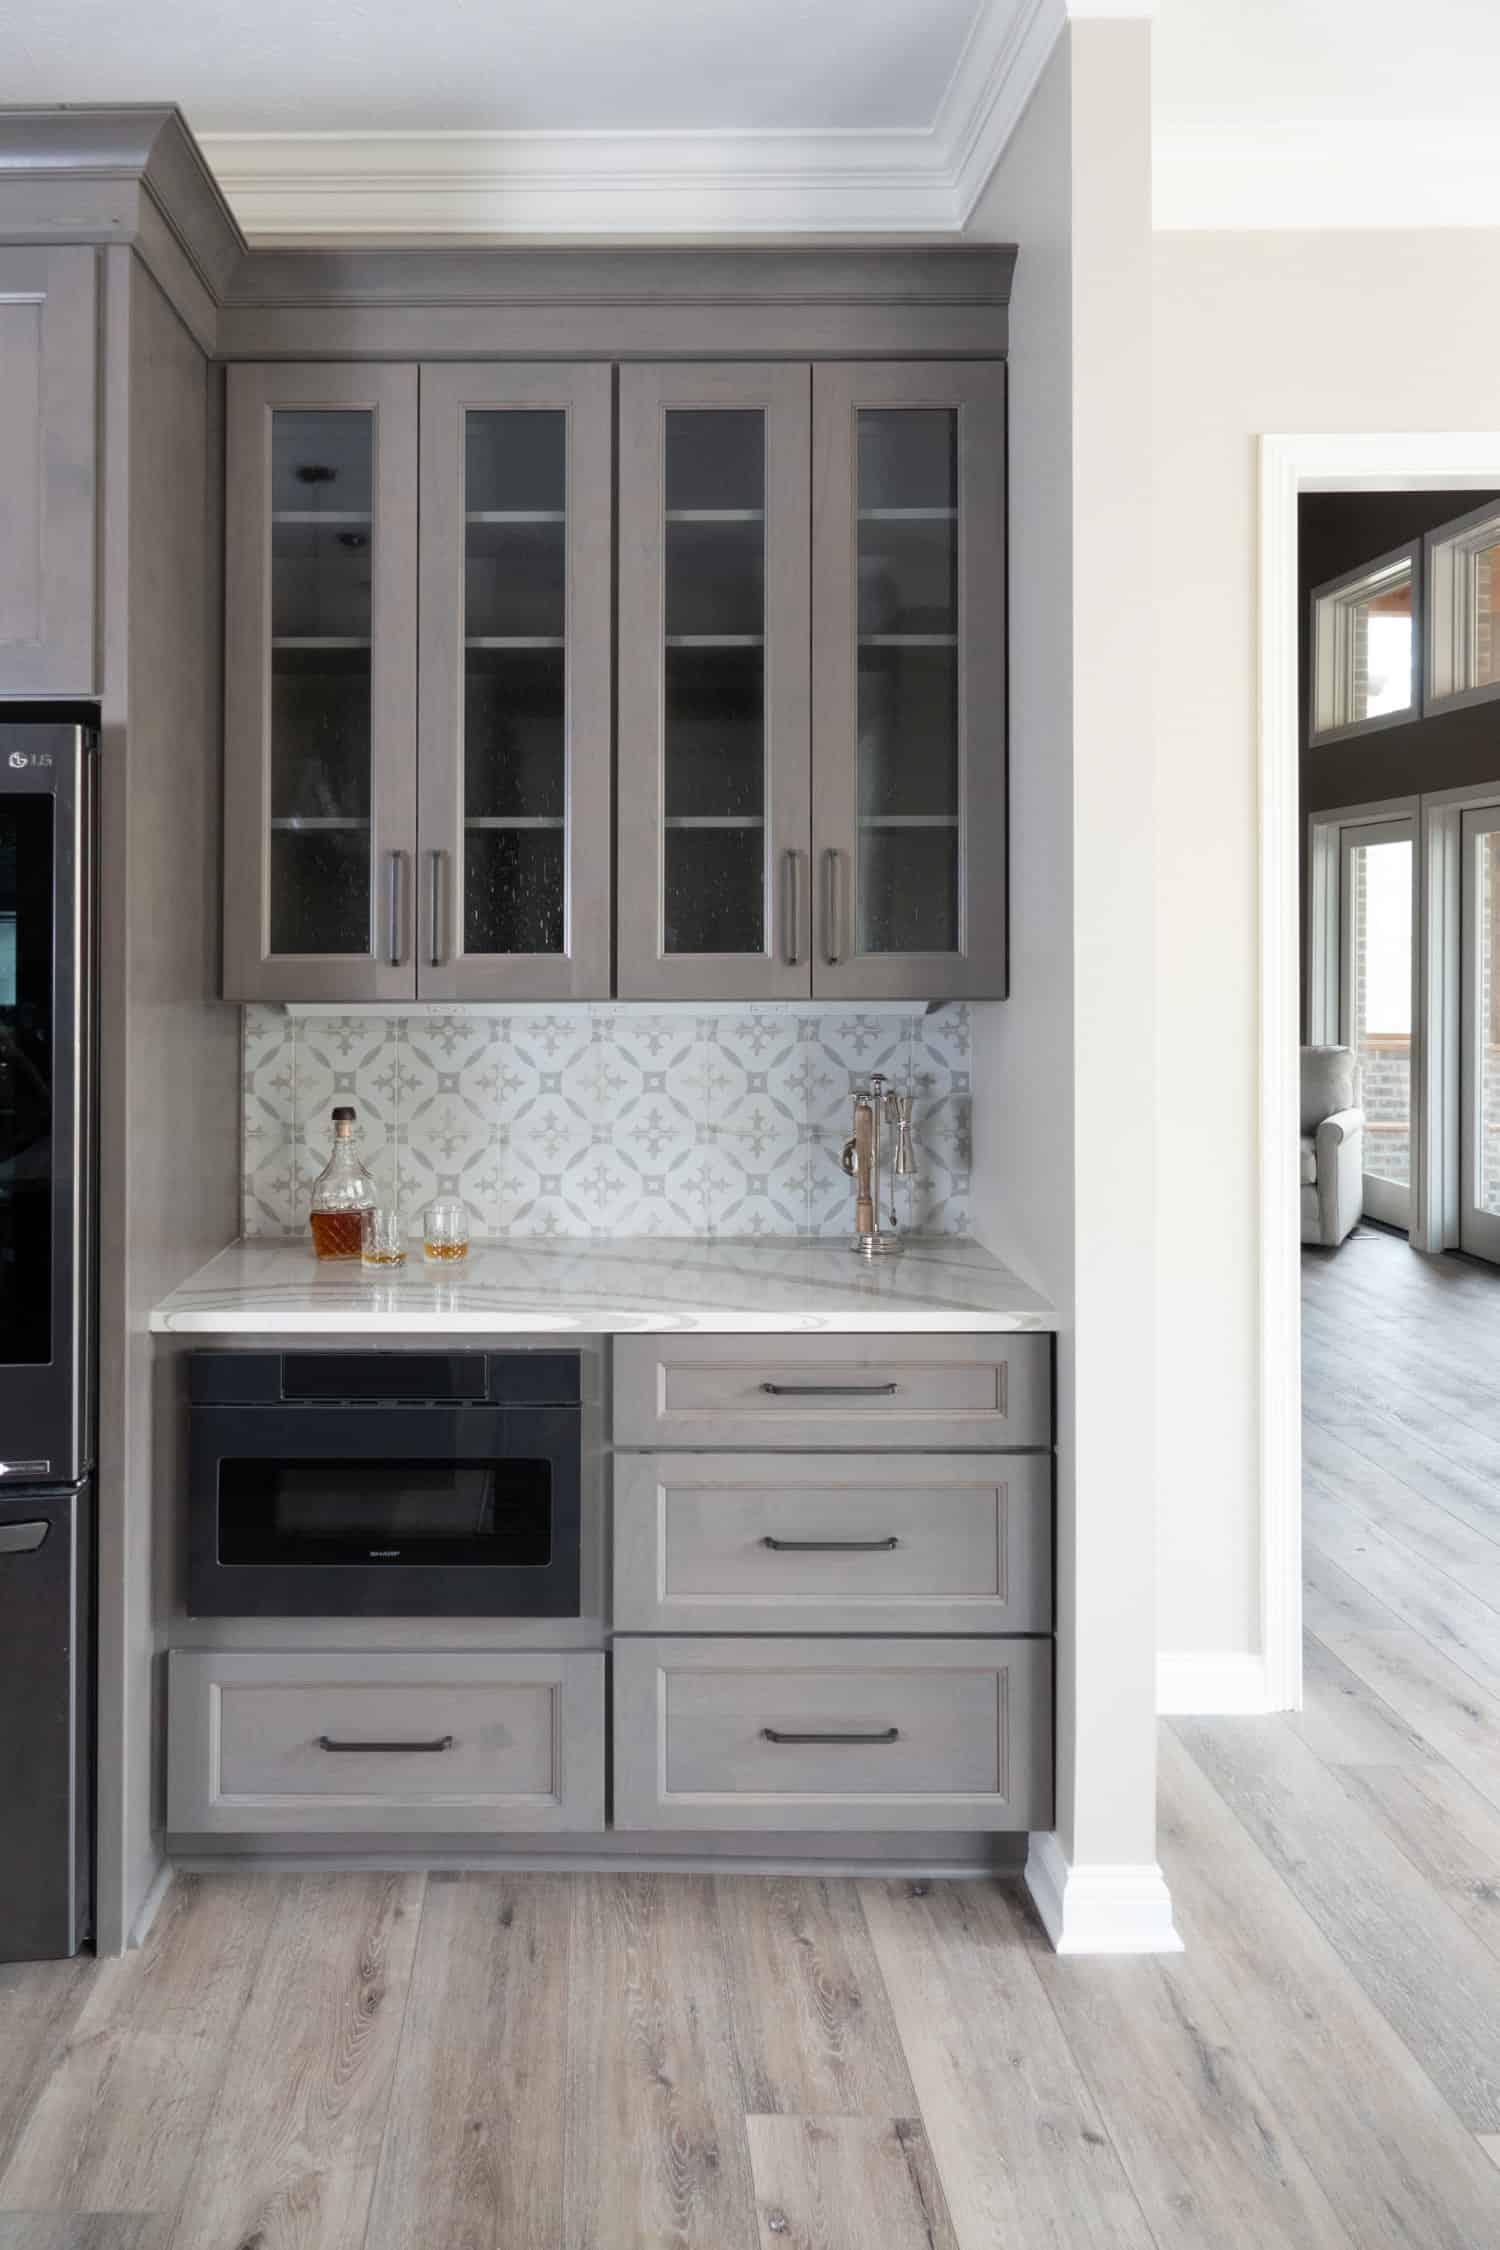 Nicholas Design Build | Remodel a kitchen with gray cabinets and black appliances.